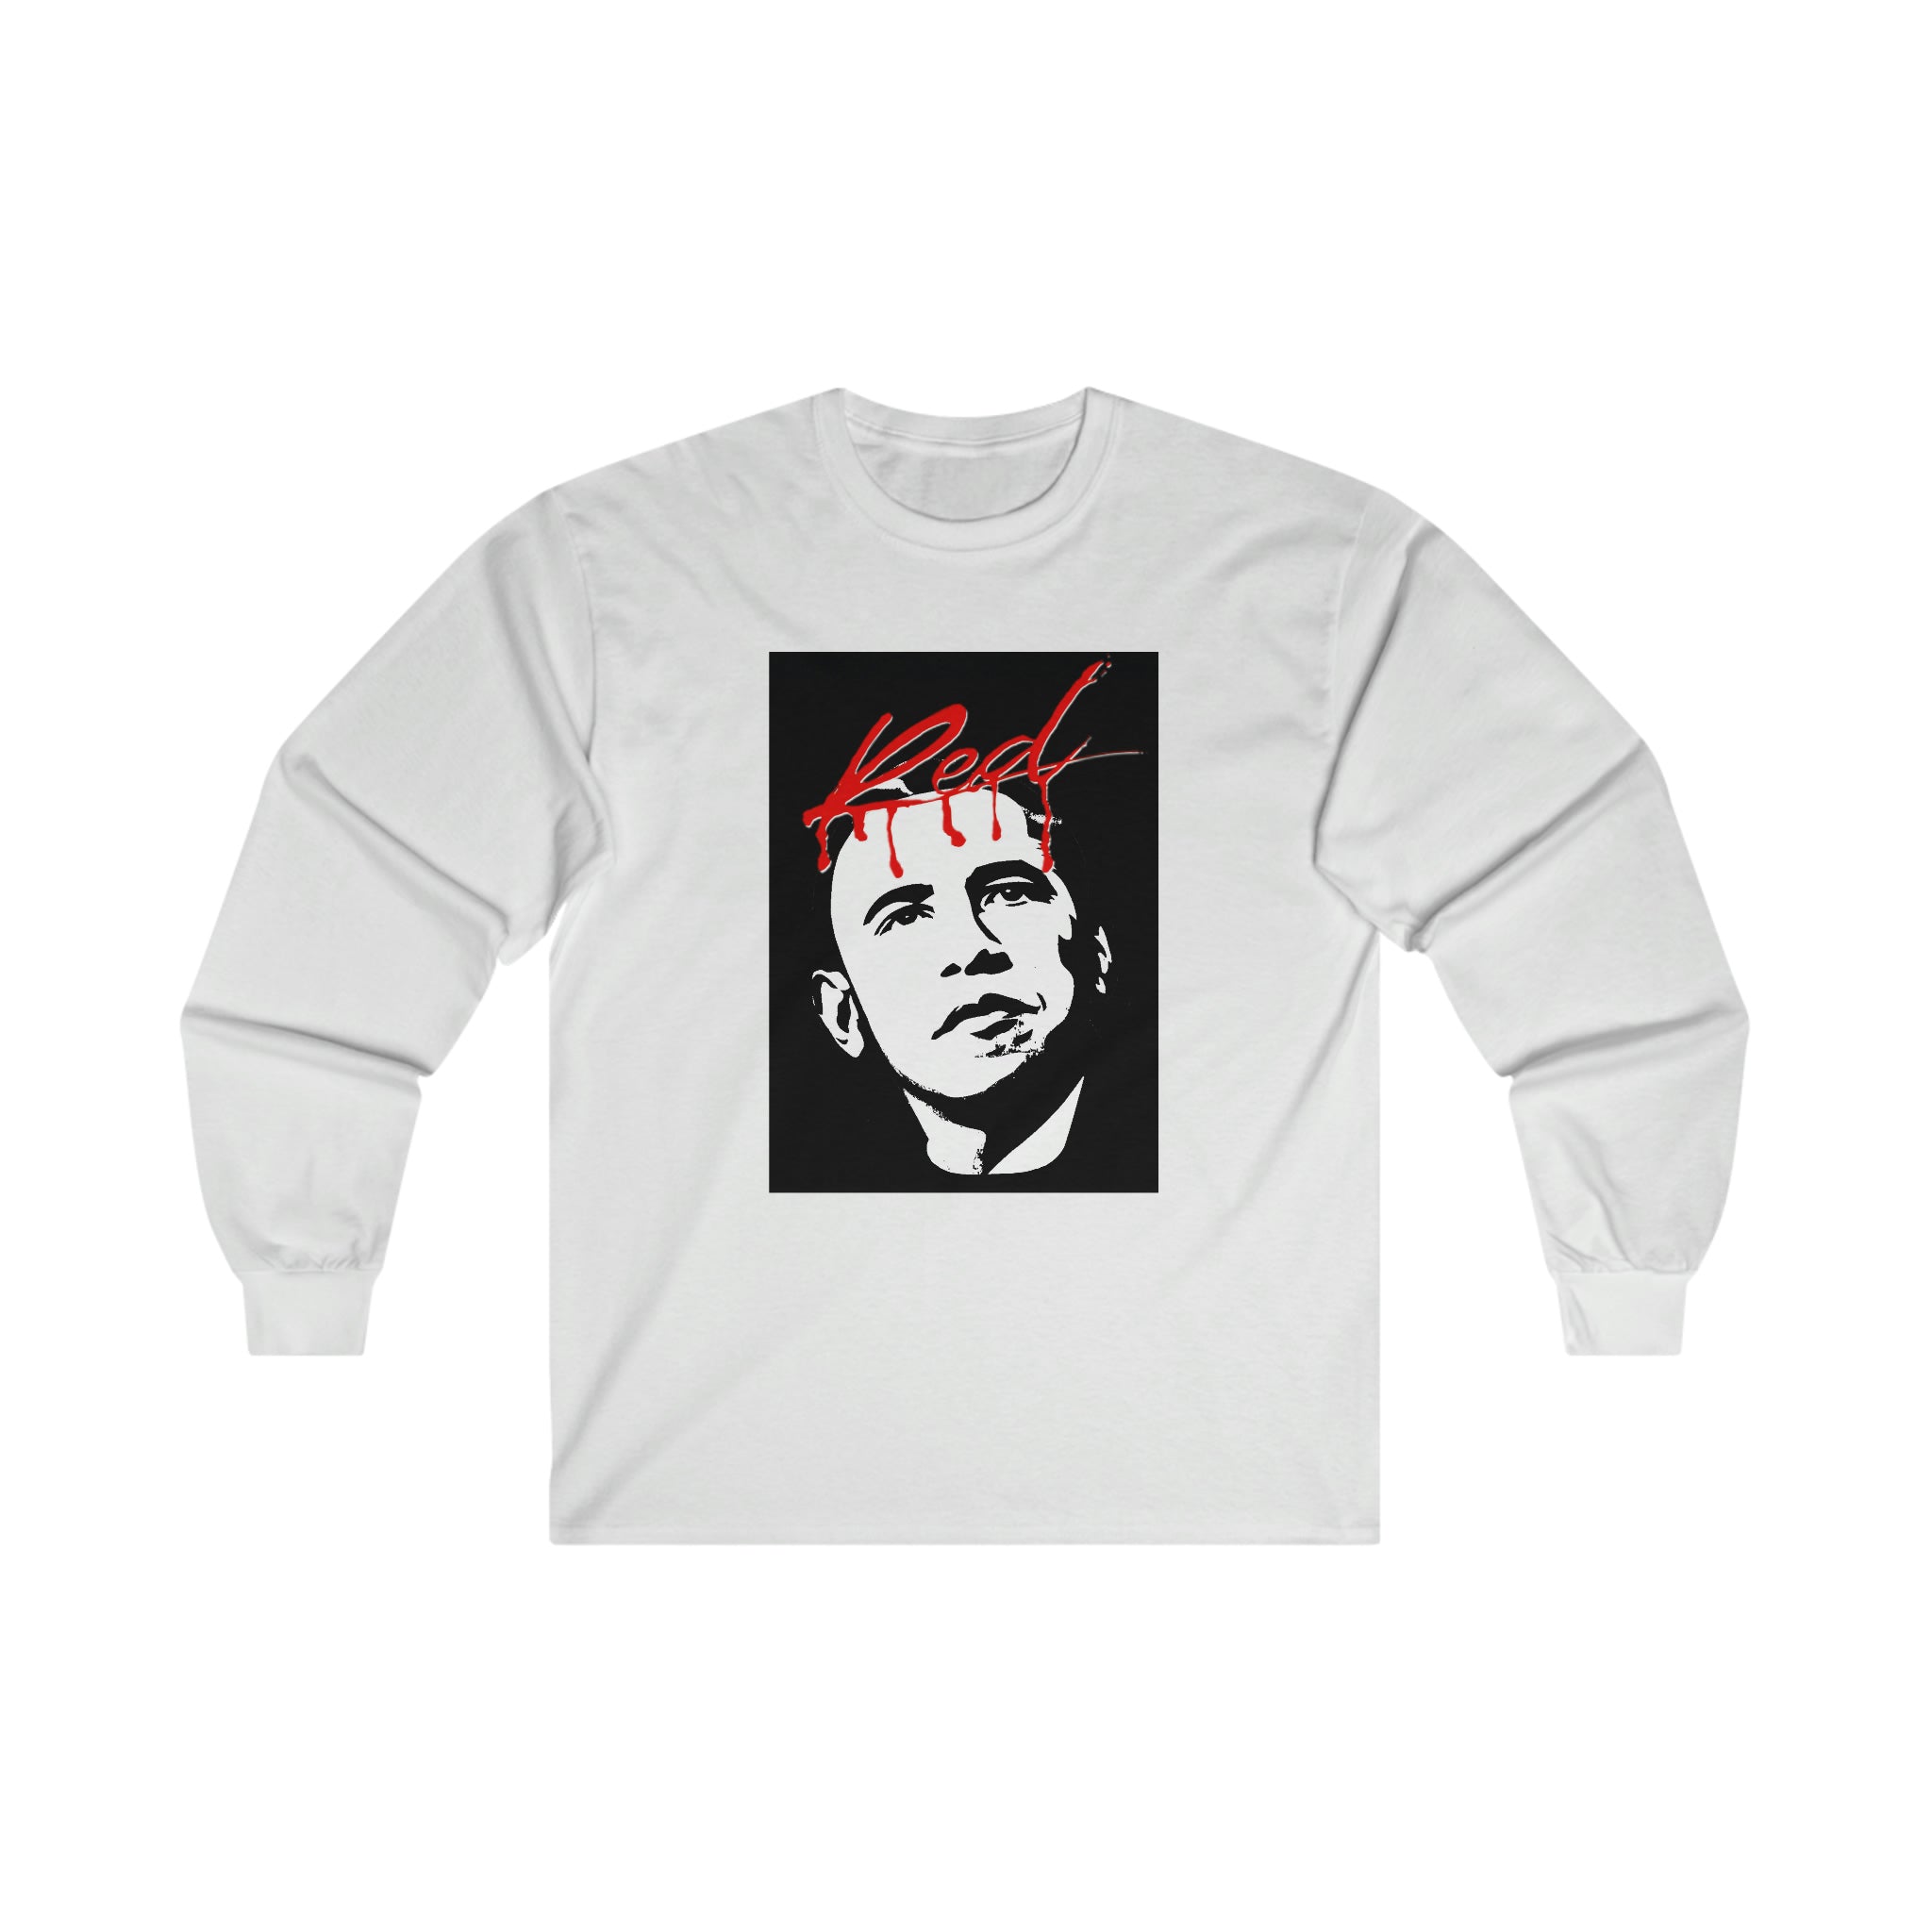 Obama x Carti WLR - Ultra Cotton Long Sleeve Tee - All Colors